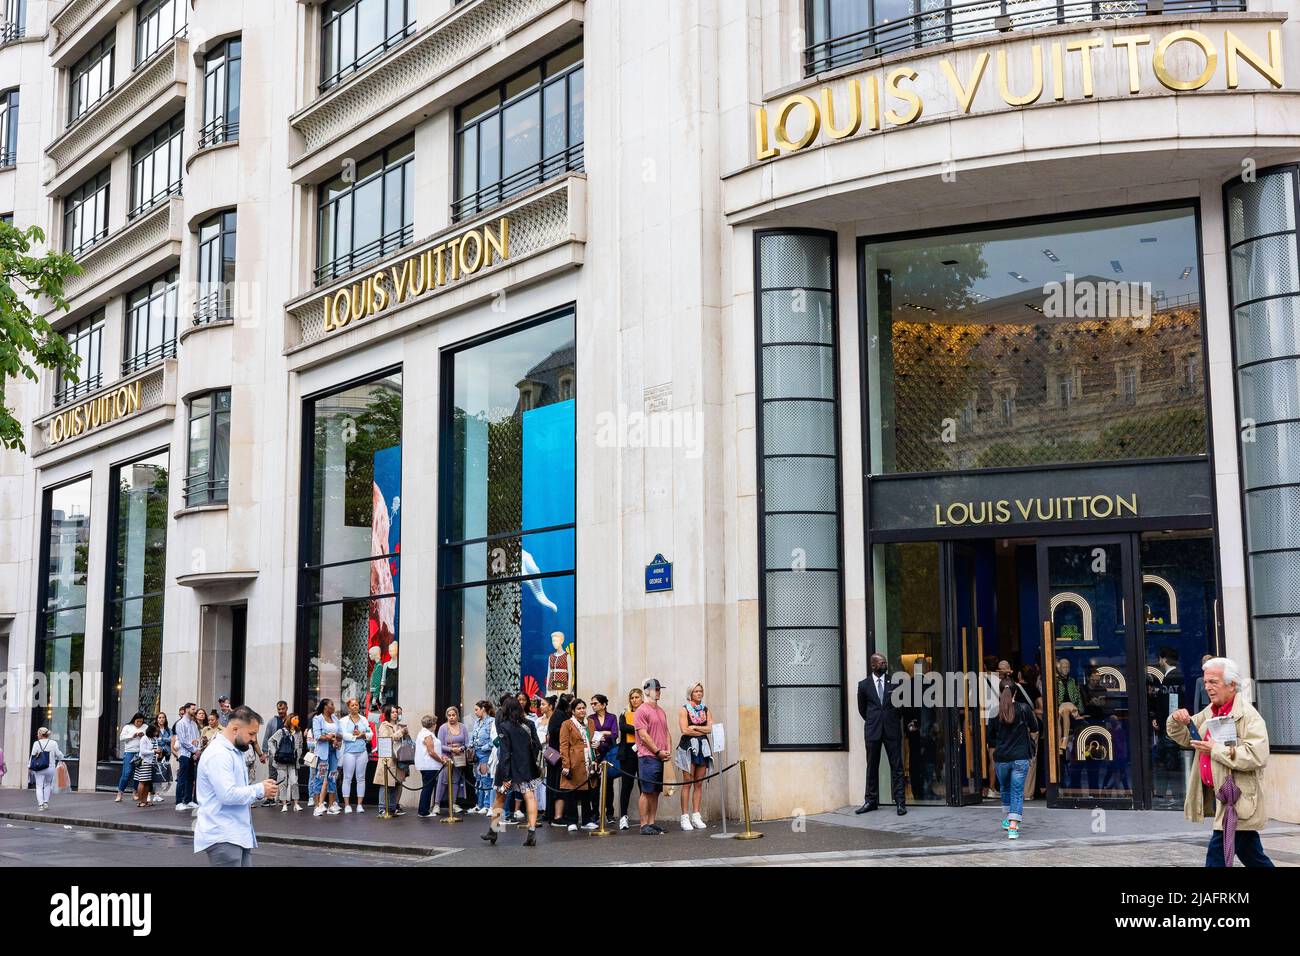 Paris, France - July 8, 2015: Entrance To The Louis Vuitton Luxury Fashion  Store On Champs Elysees In Central Paris, France Stock Photo, Picture and  Royalty Free Image. Image 51992005.